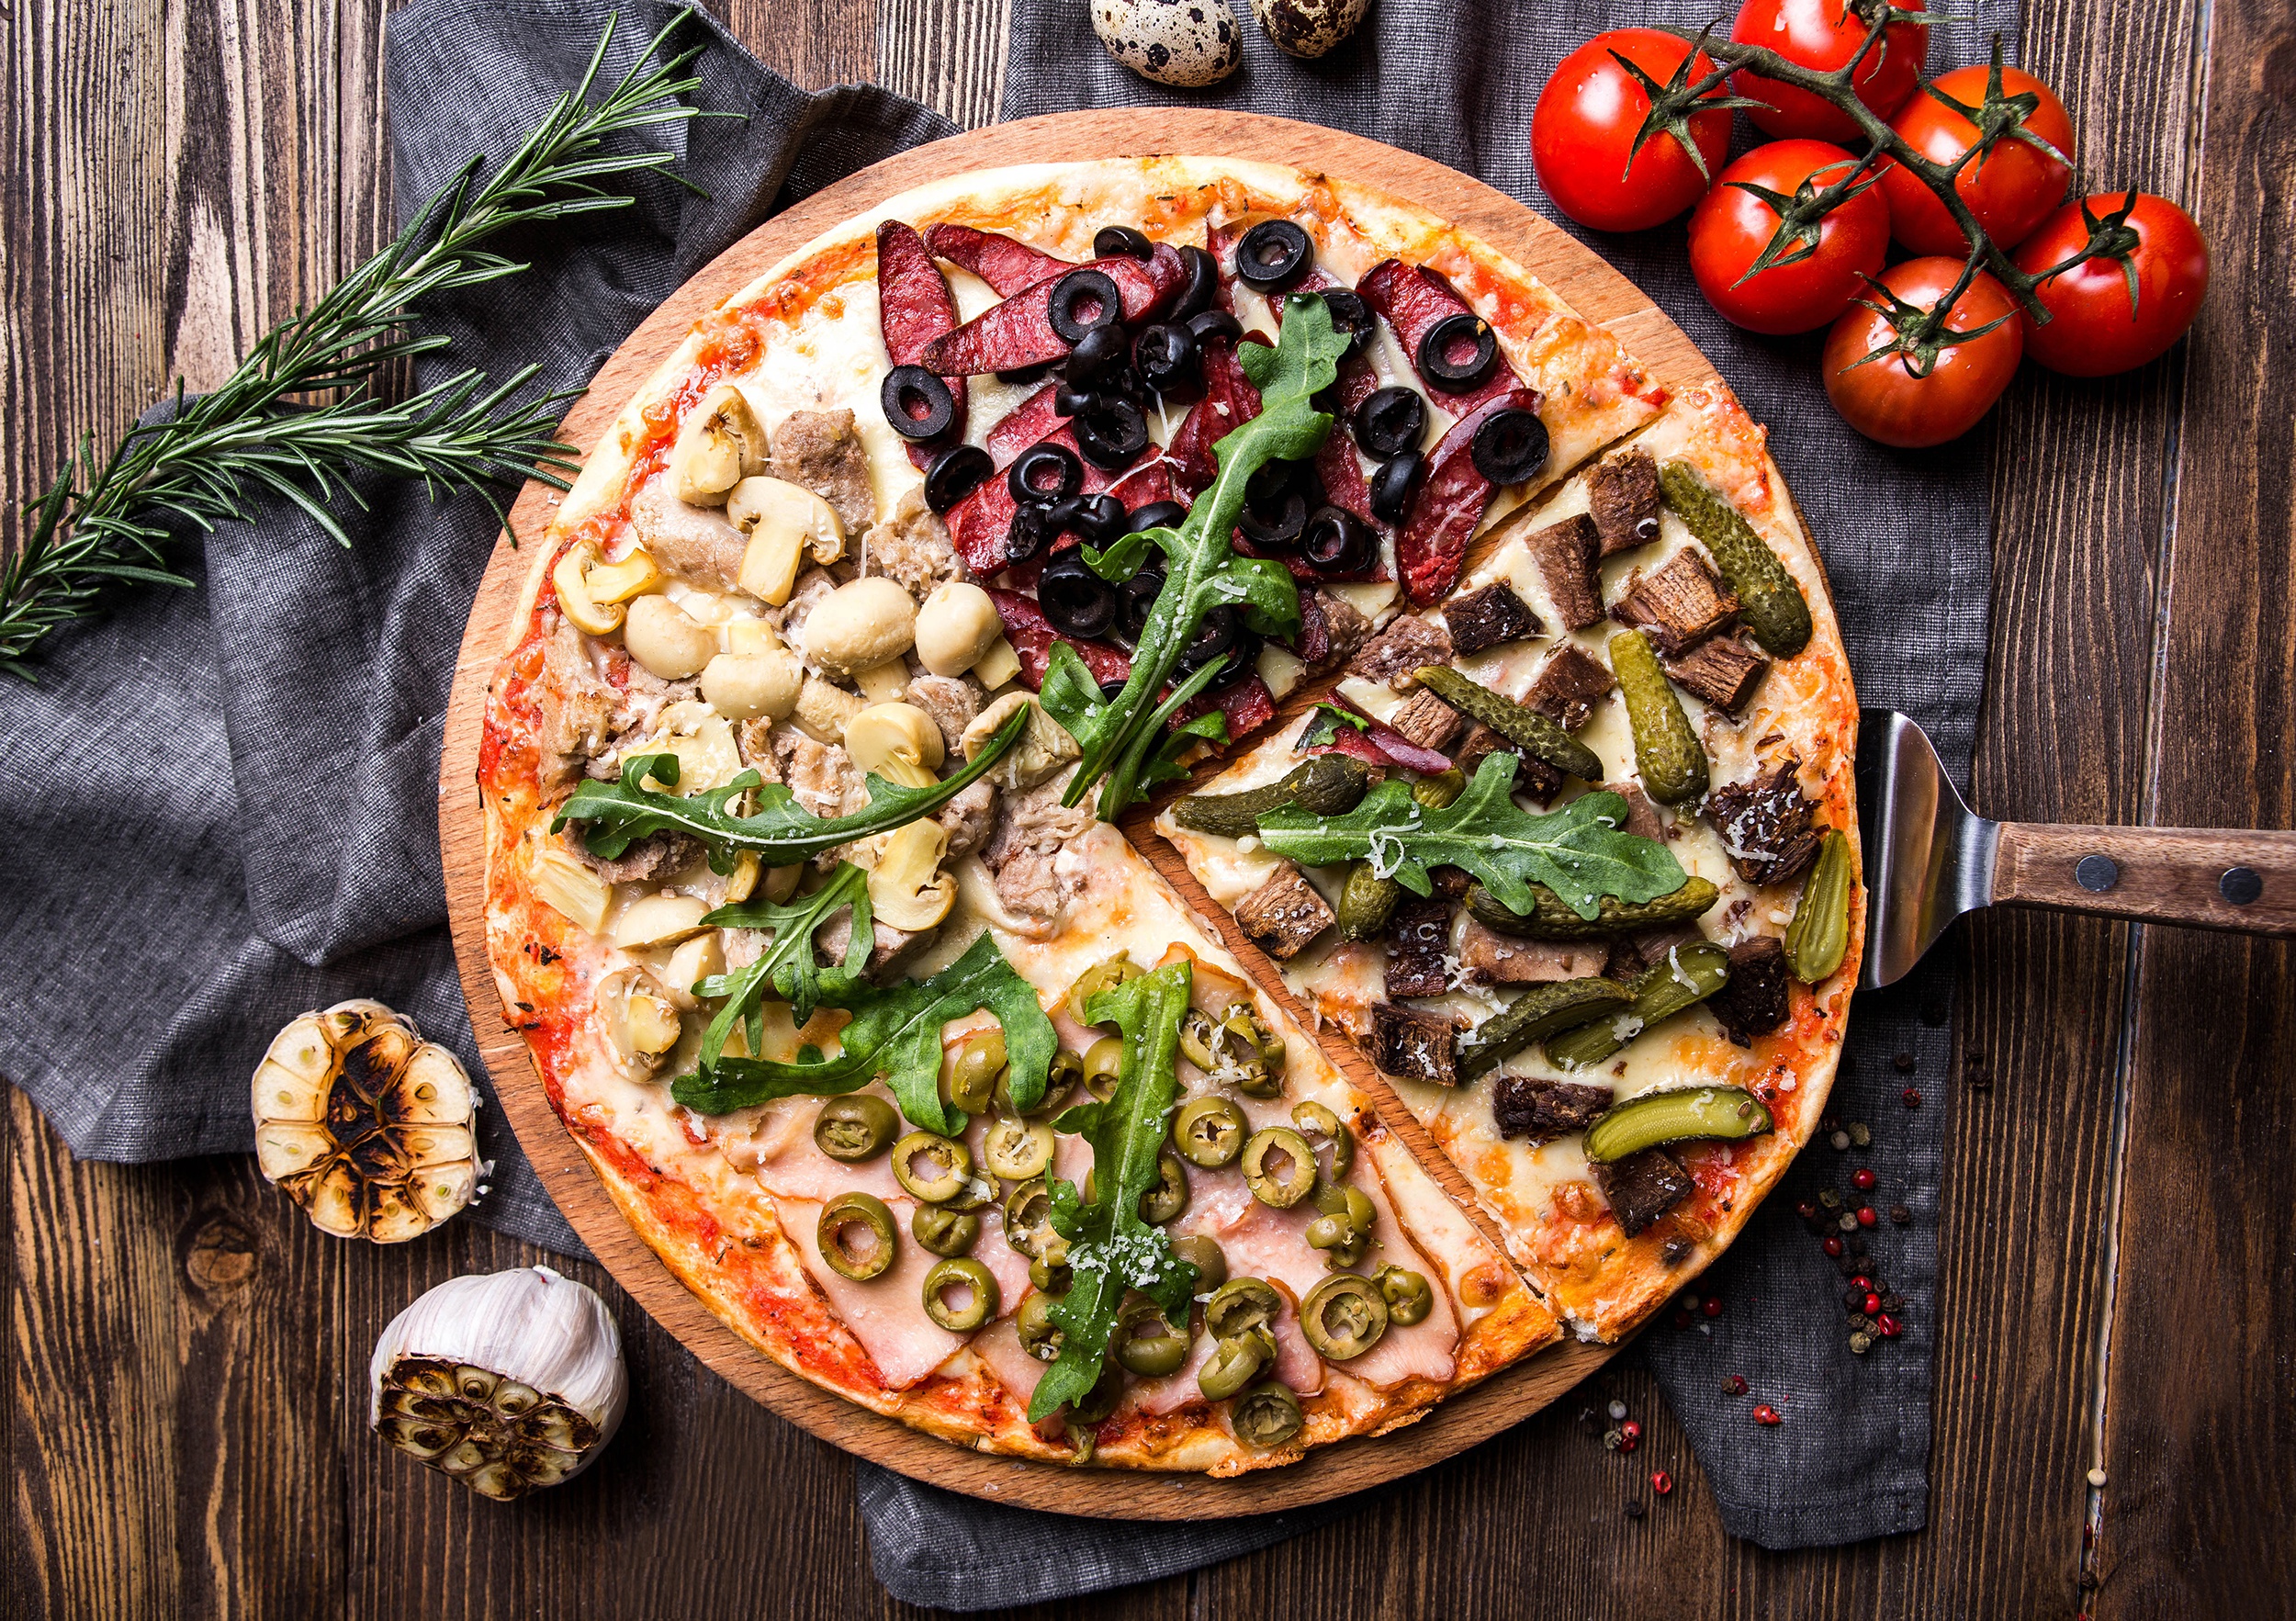 General 2500x1765 food pizza tomatoes Garlic mushroom olives pickles rosemary napkin wooden surface